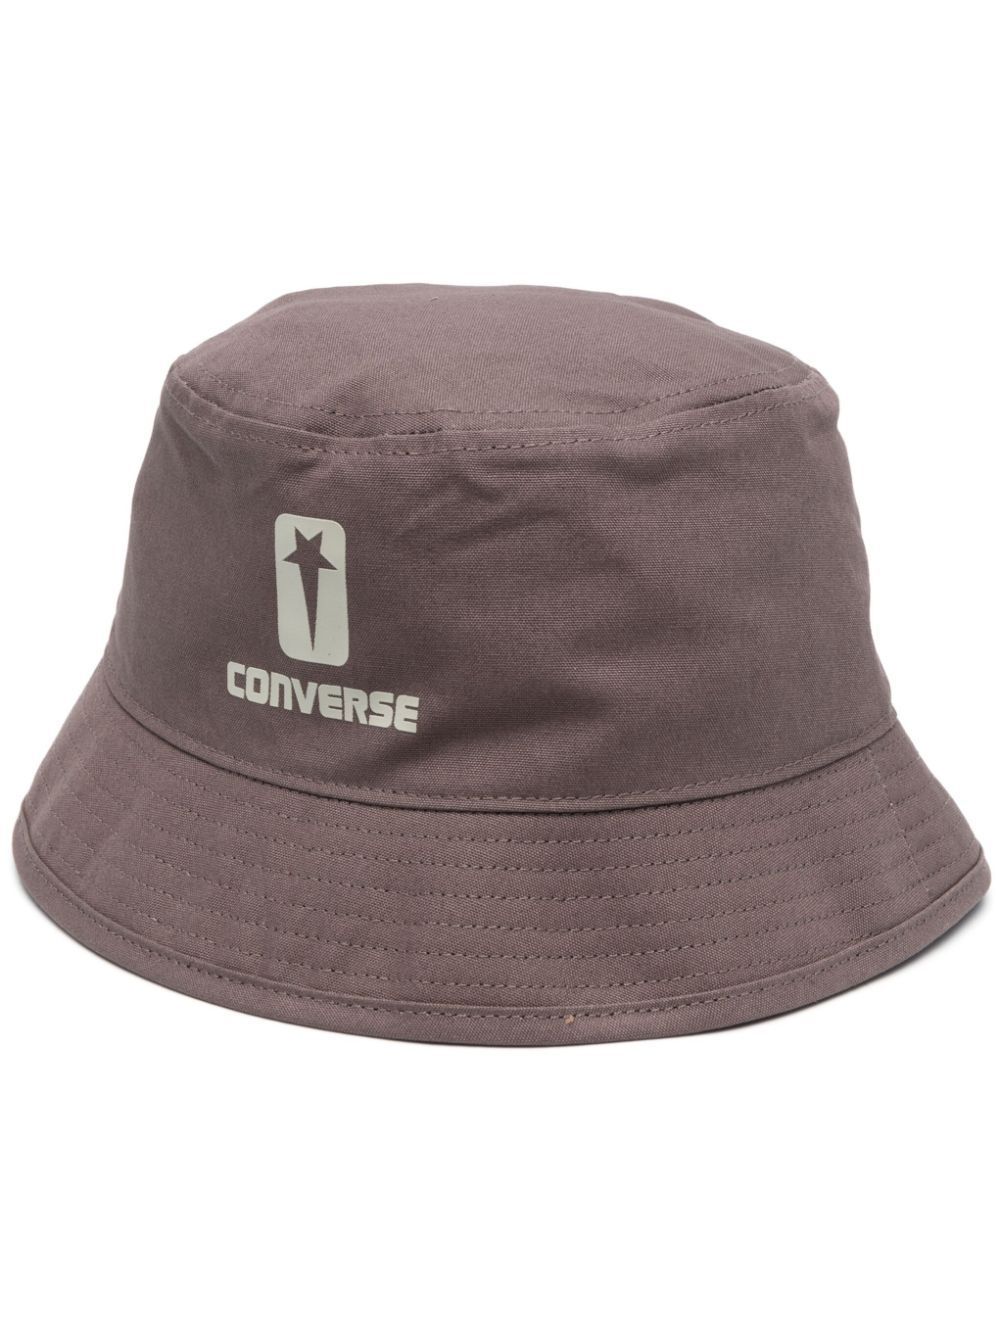 Drkshdw X Converse Converse Printed Cotton Bucket Hat In Dust